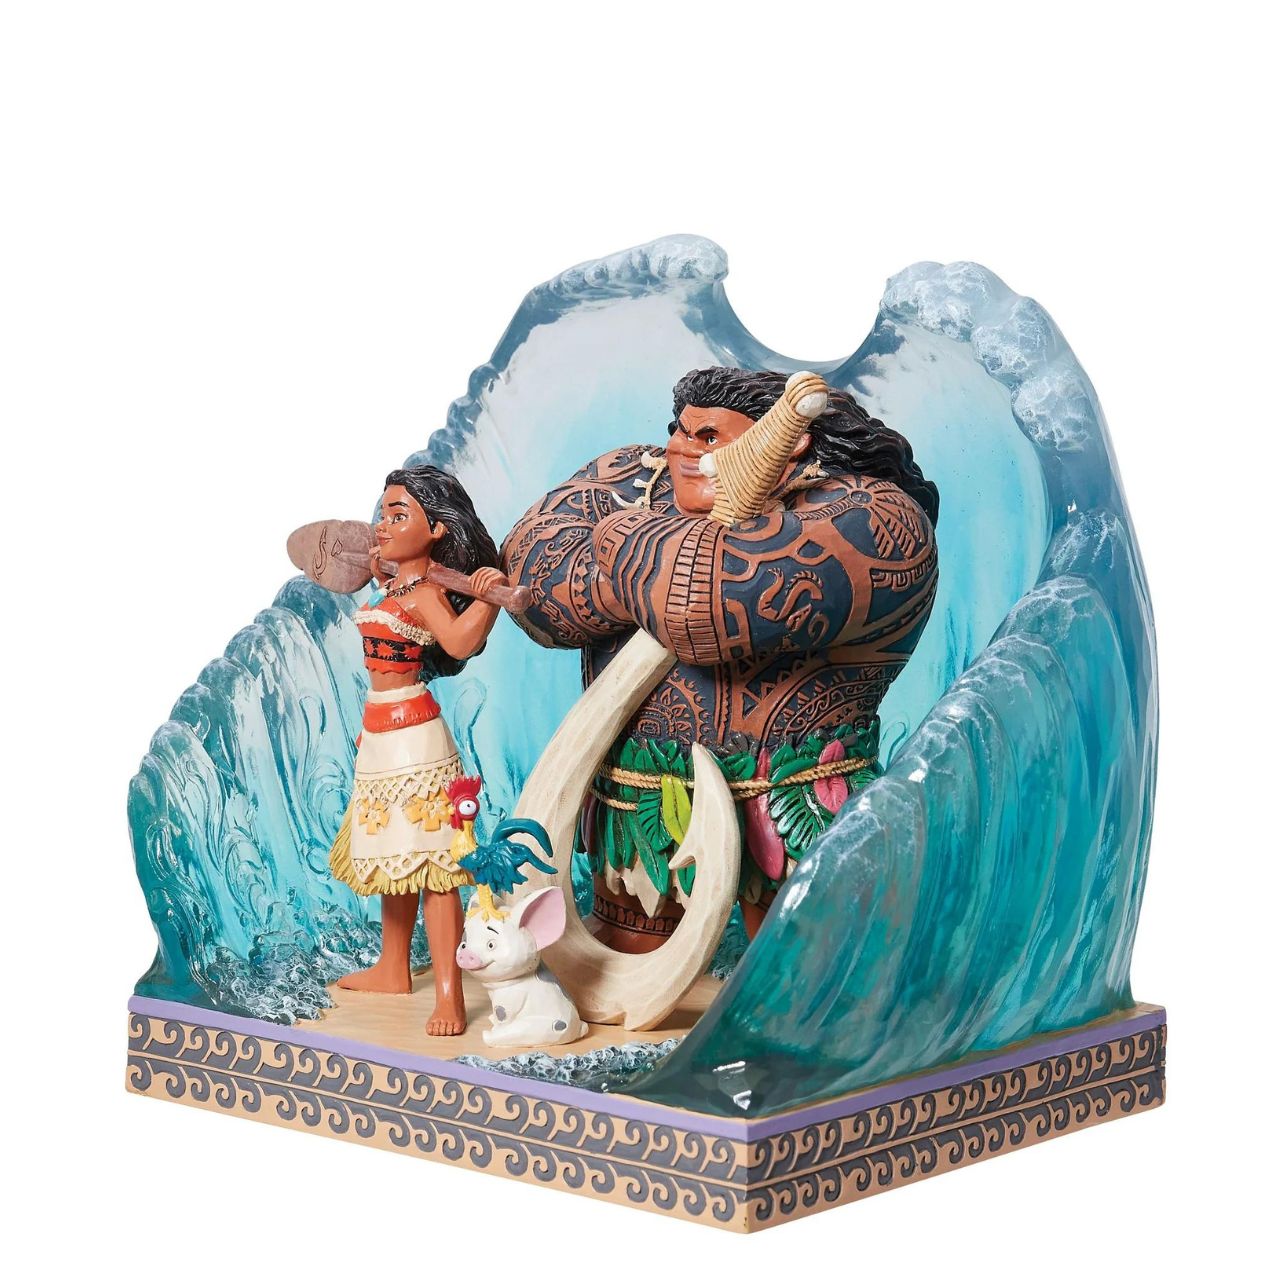 Moana Movie Poster Movie Scene  This powerful carved by heart captures the essence of the 2016 Disney film Moana, featuring herself, Maui, Hei Hei the Rooster and Pua the Pig. Designed by award winning artist Jim Shore, hand crafted using high quality cast stone and hand painted.